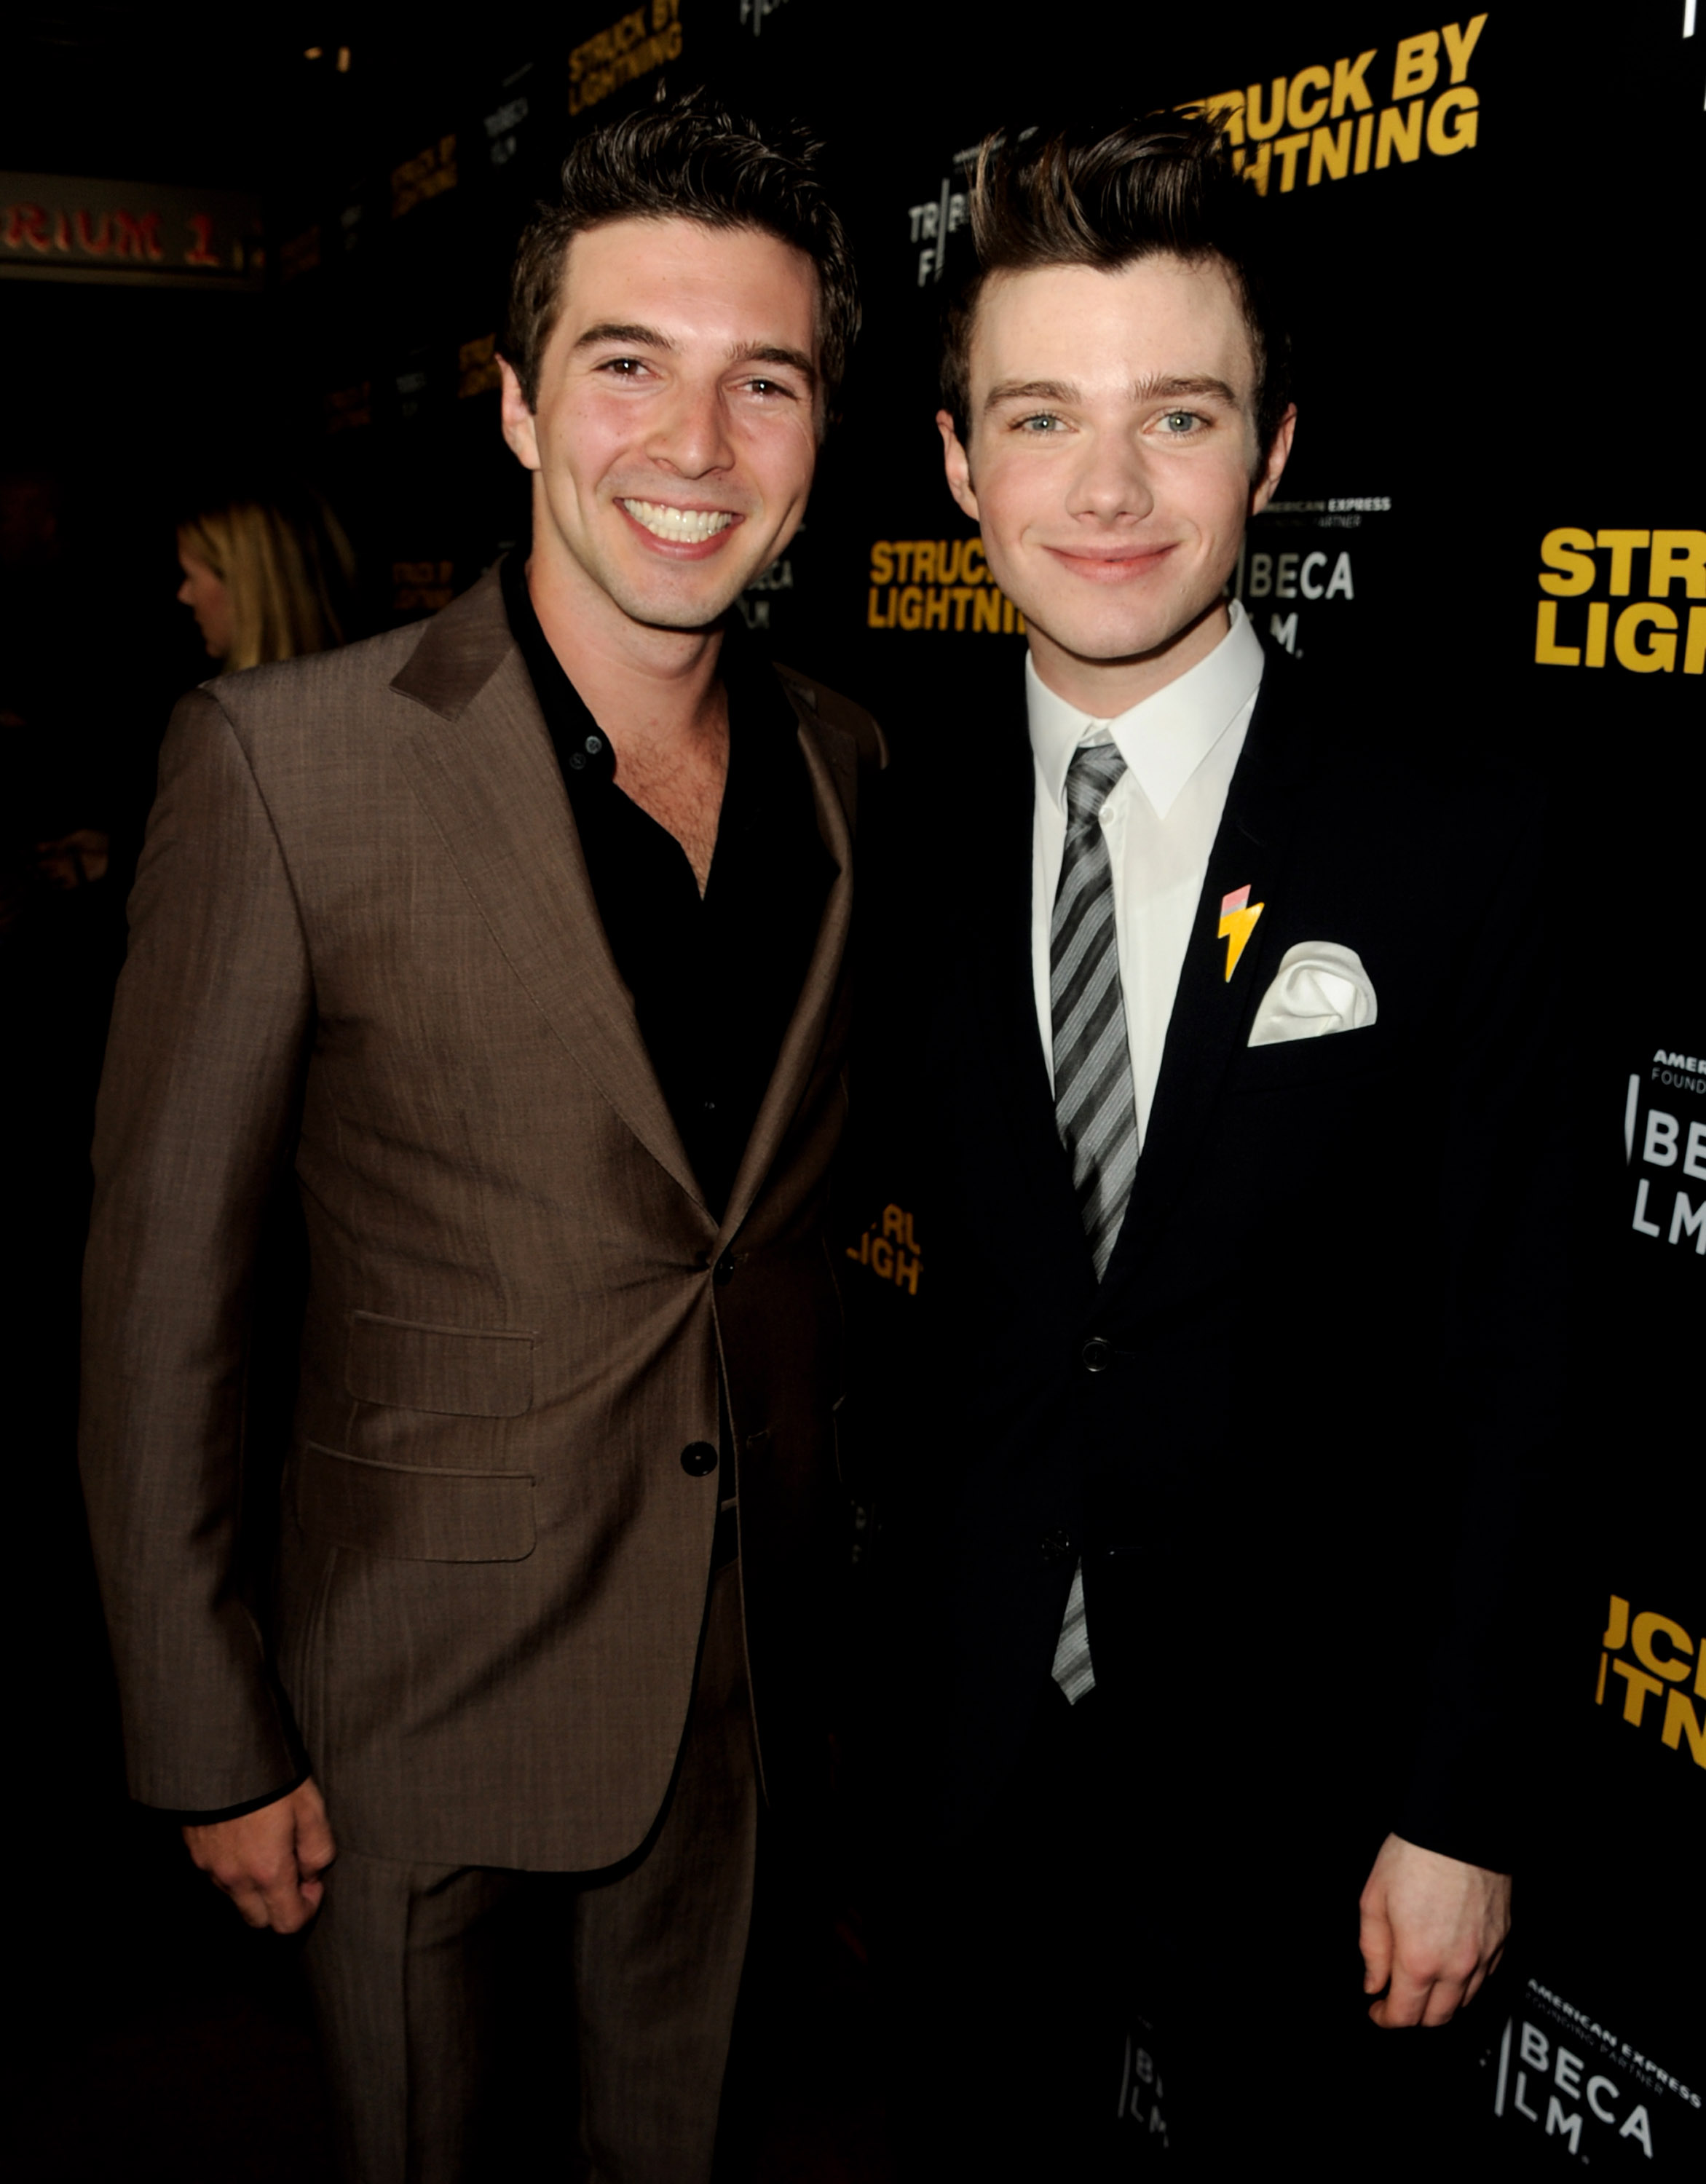 Roberto Aguire and Chris Colfer at LA premiere of Struck By Lightning